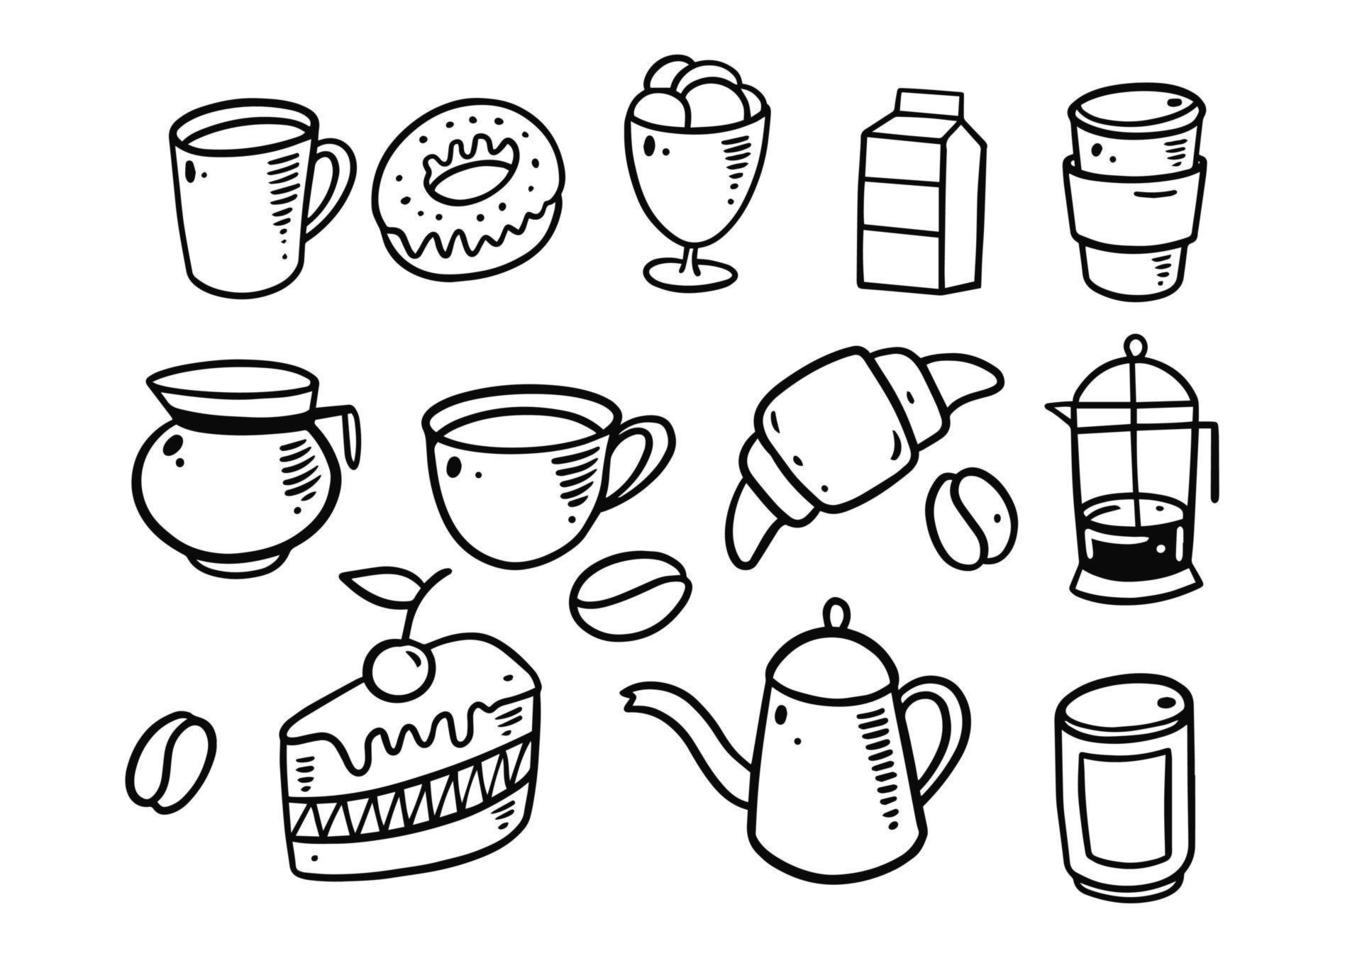 Sweet breakfast food hand drawn doodle set elements. Coffee and dessert vector illustration.